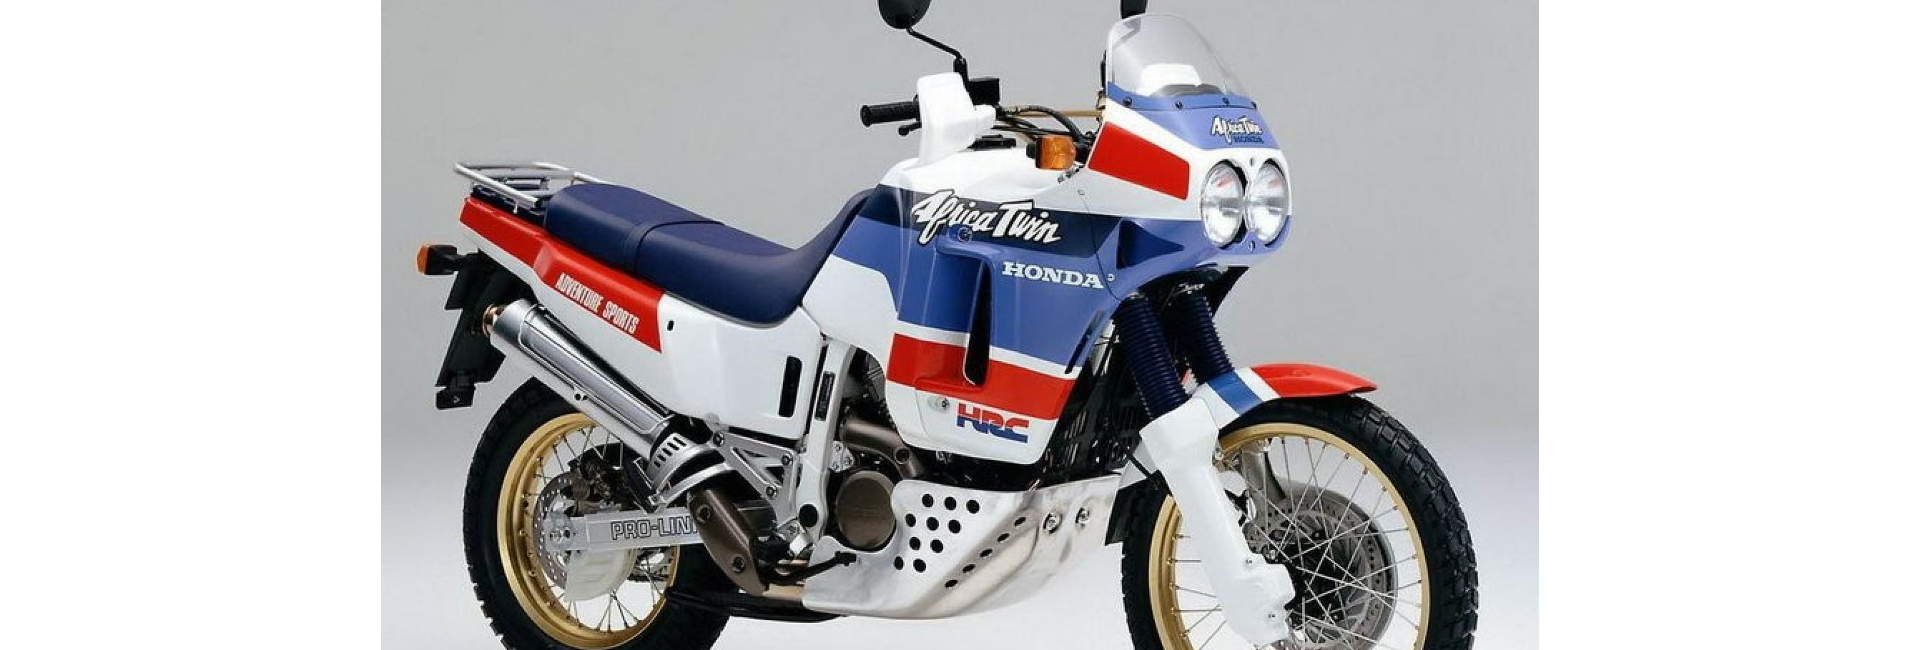 Africa twin: evolution of an iconic motorcycle | Interphone Site UK